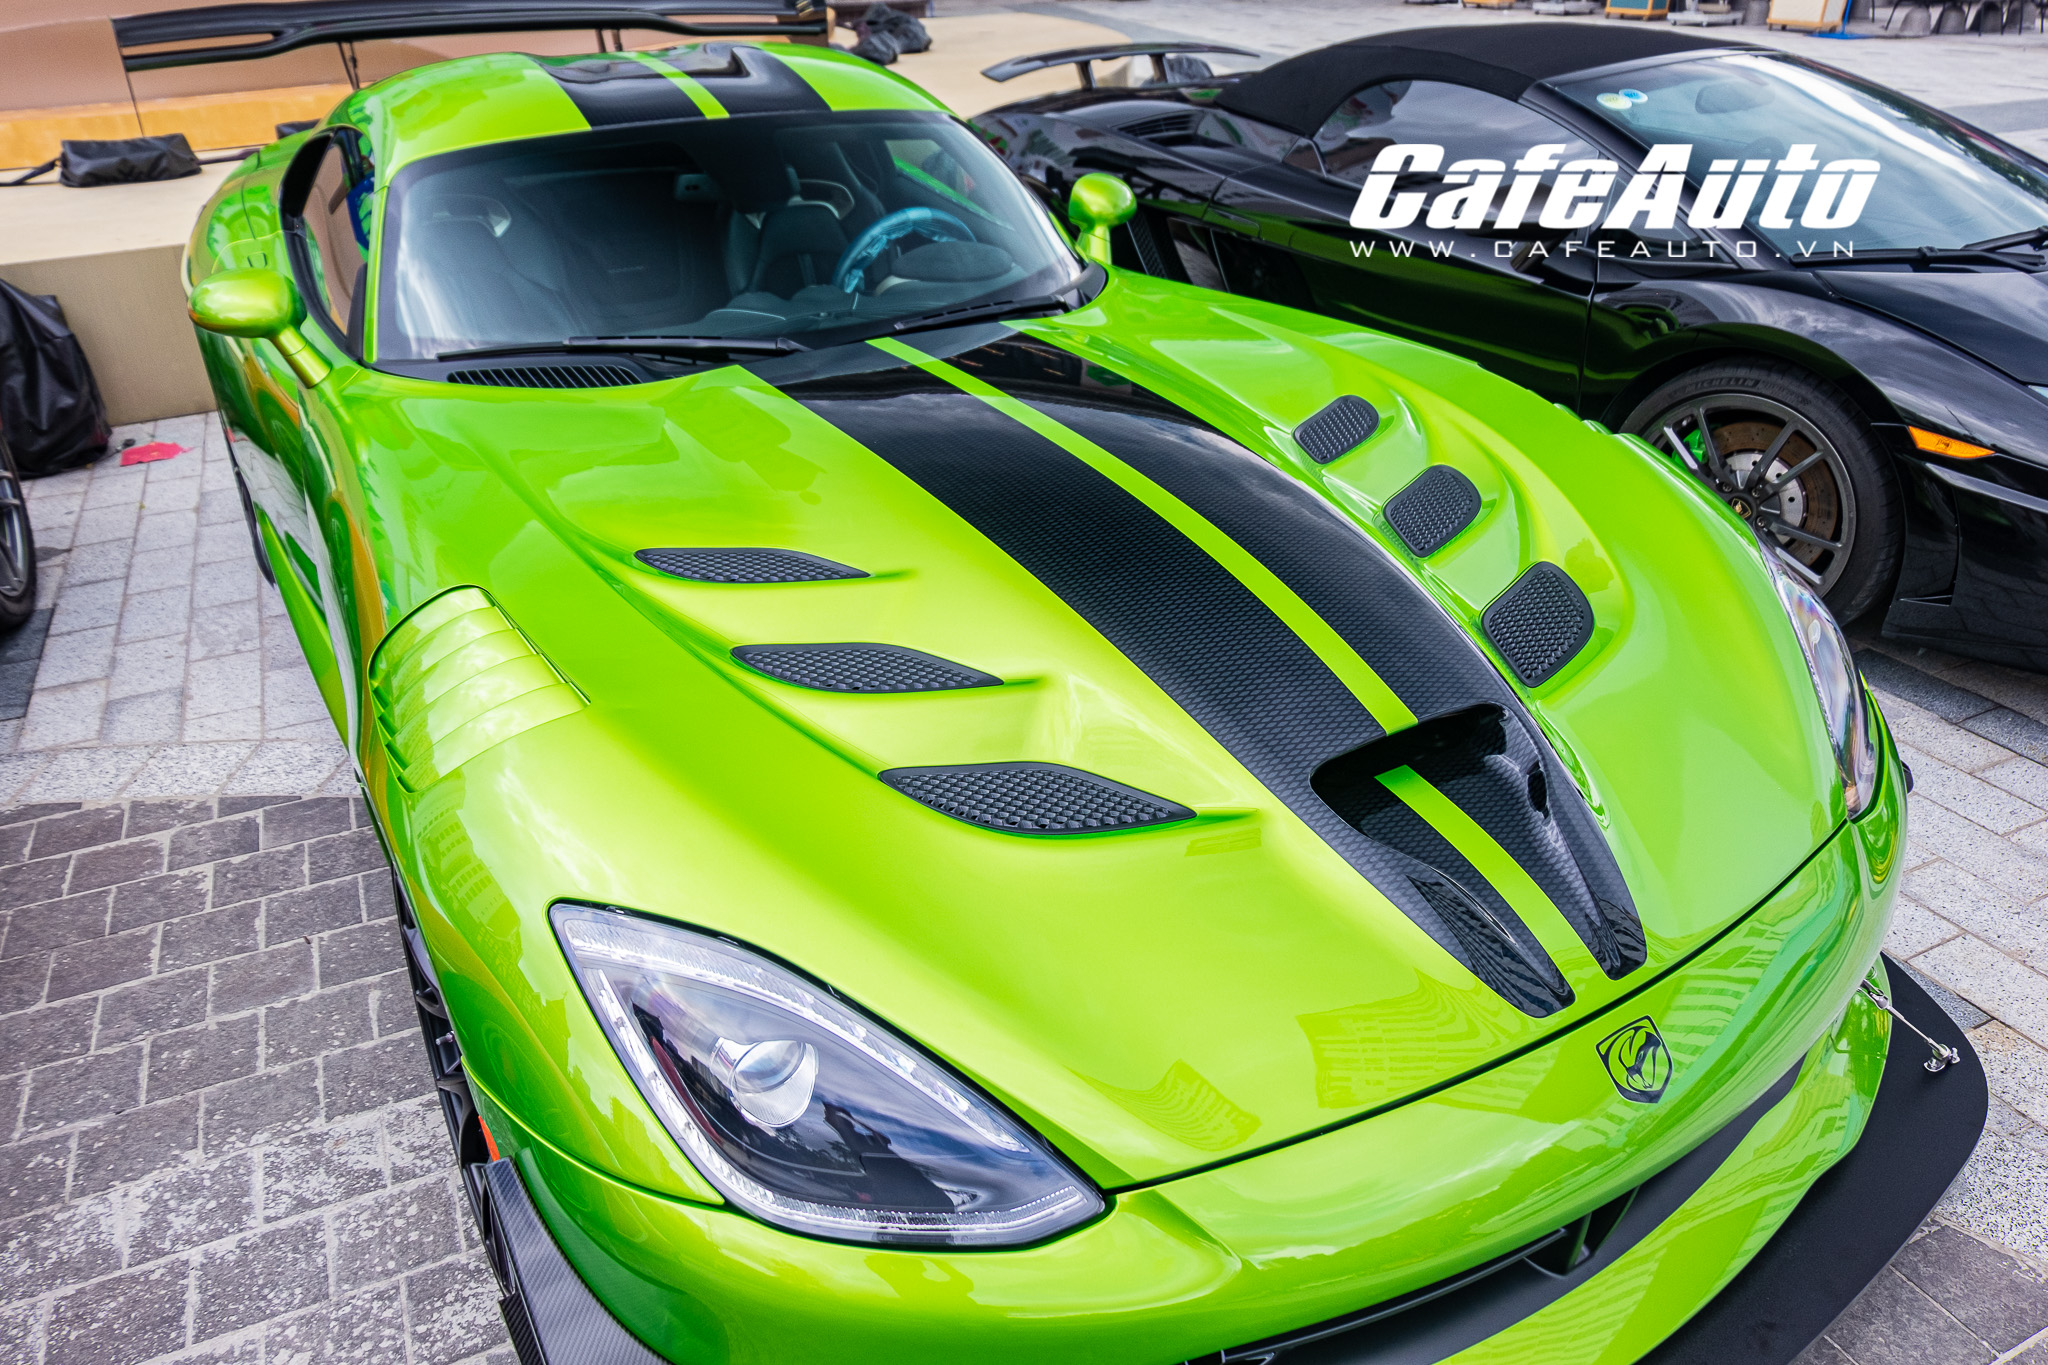 dodge-viper-acr-the-he-moi-doc-nhat-cafeautovn-8